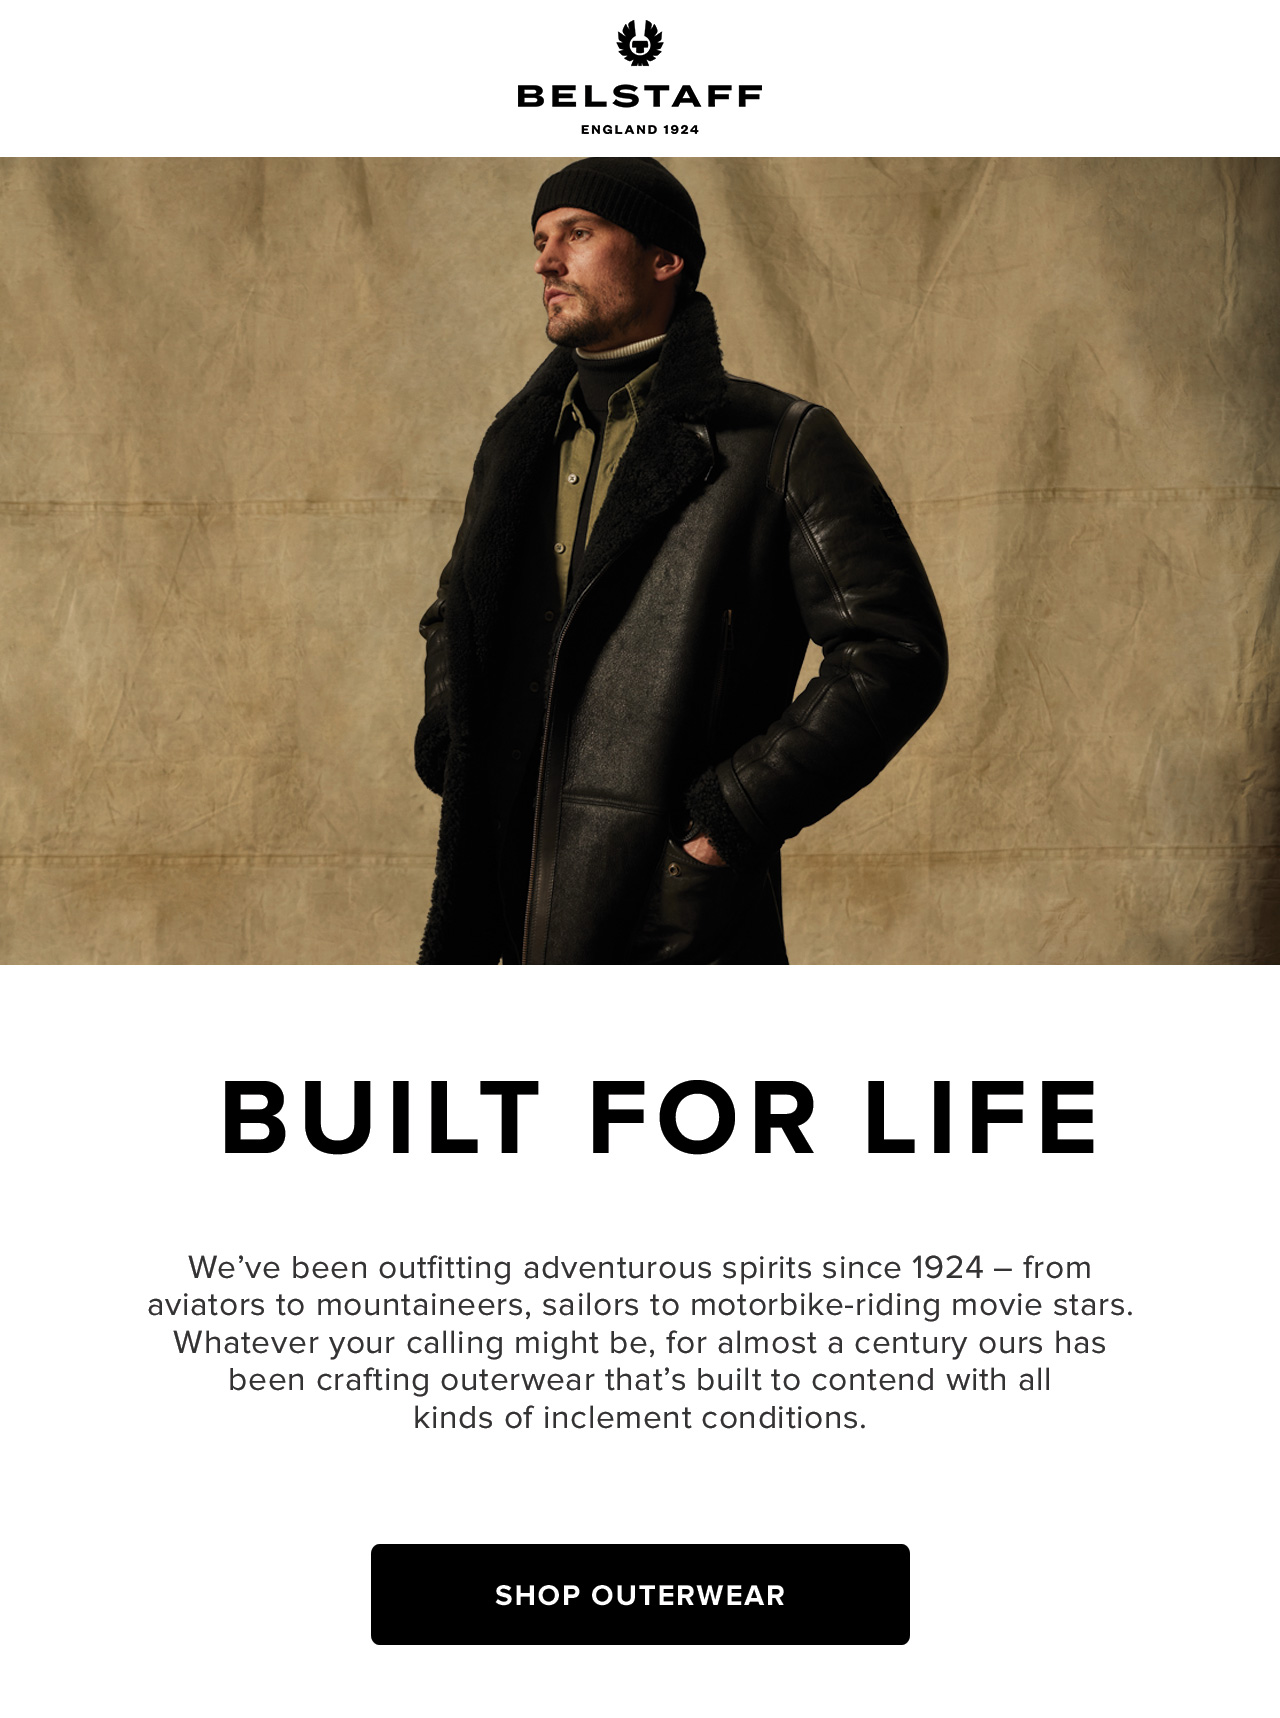 We've been outfitting adventurous spirits since 1924 - from aviators to mountaineers, sailors to motorbike-riding movie stars. Whatever your calling might be, for almost a century ours has been crafting outerwear that's built to contend with all kinds of inclement conditions.